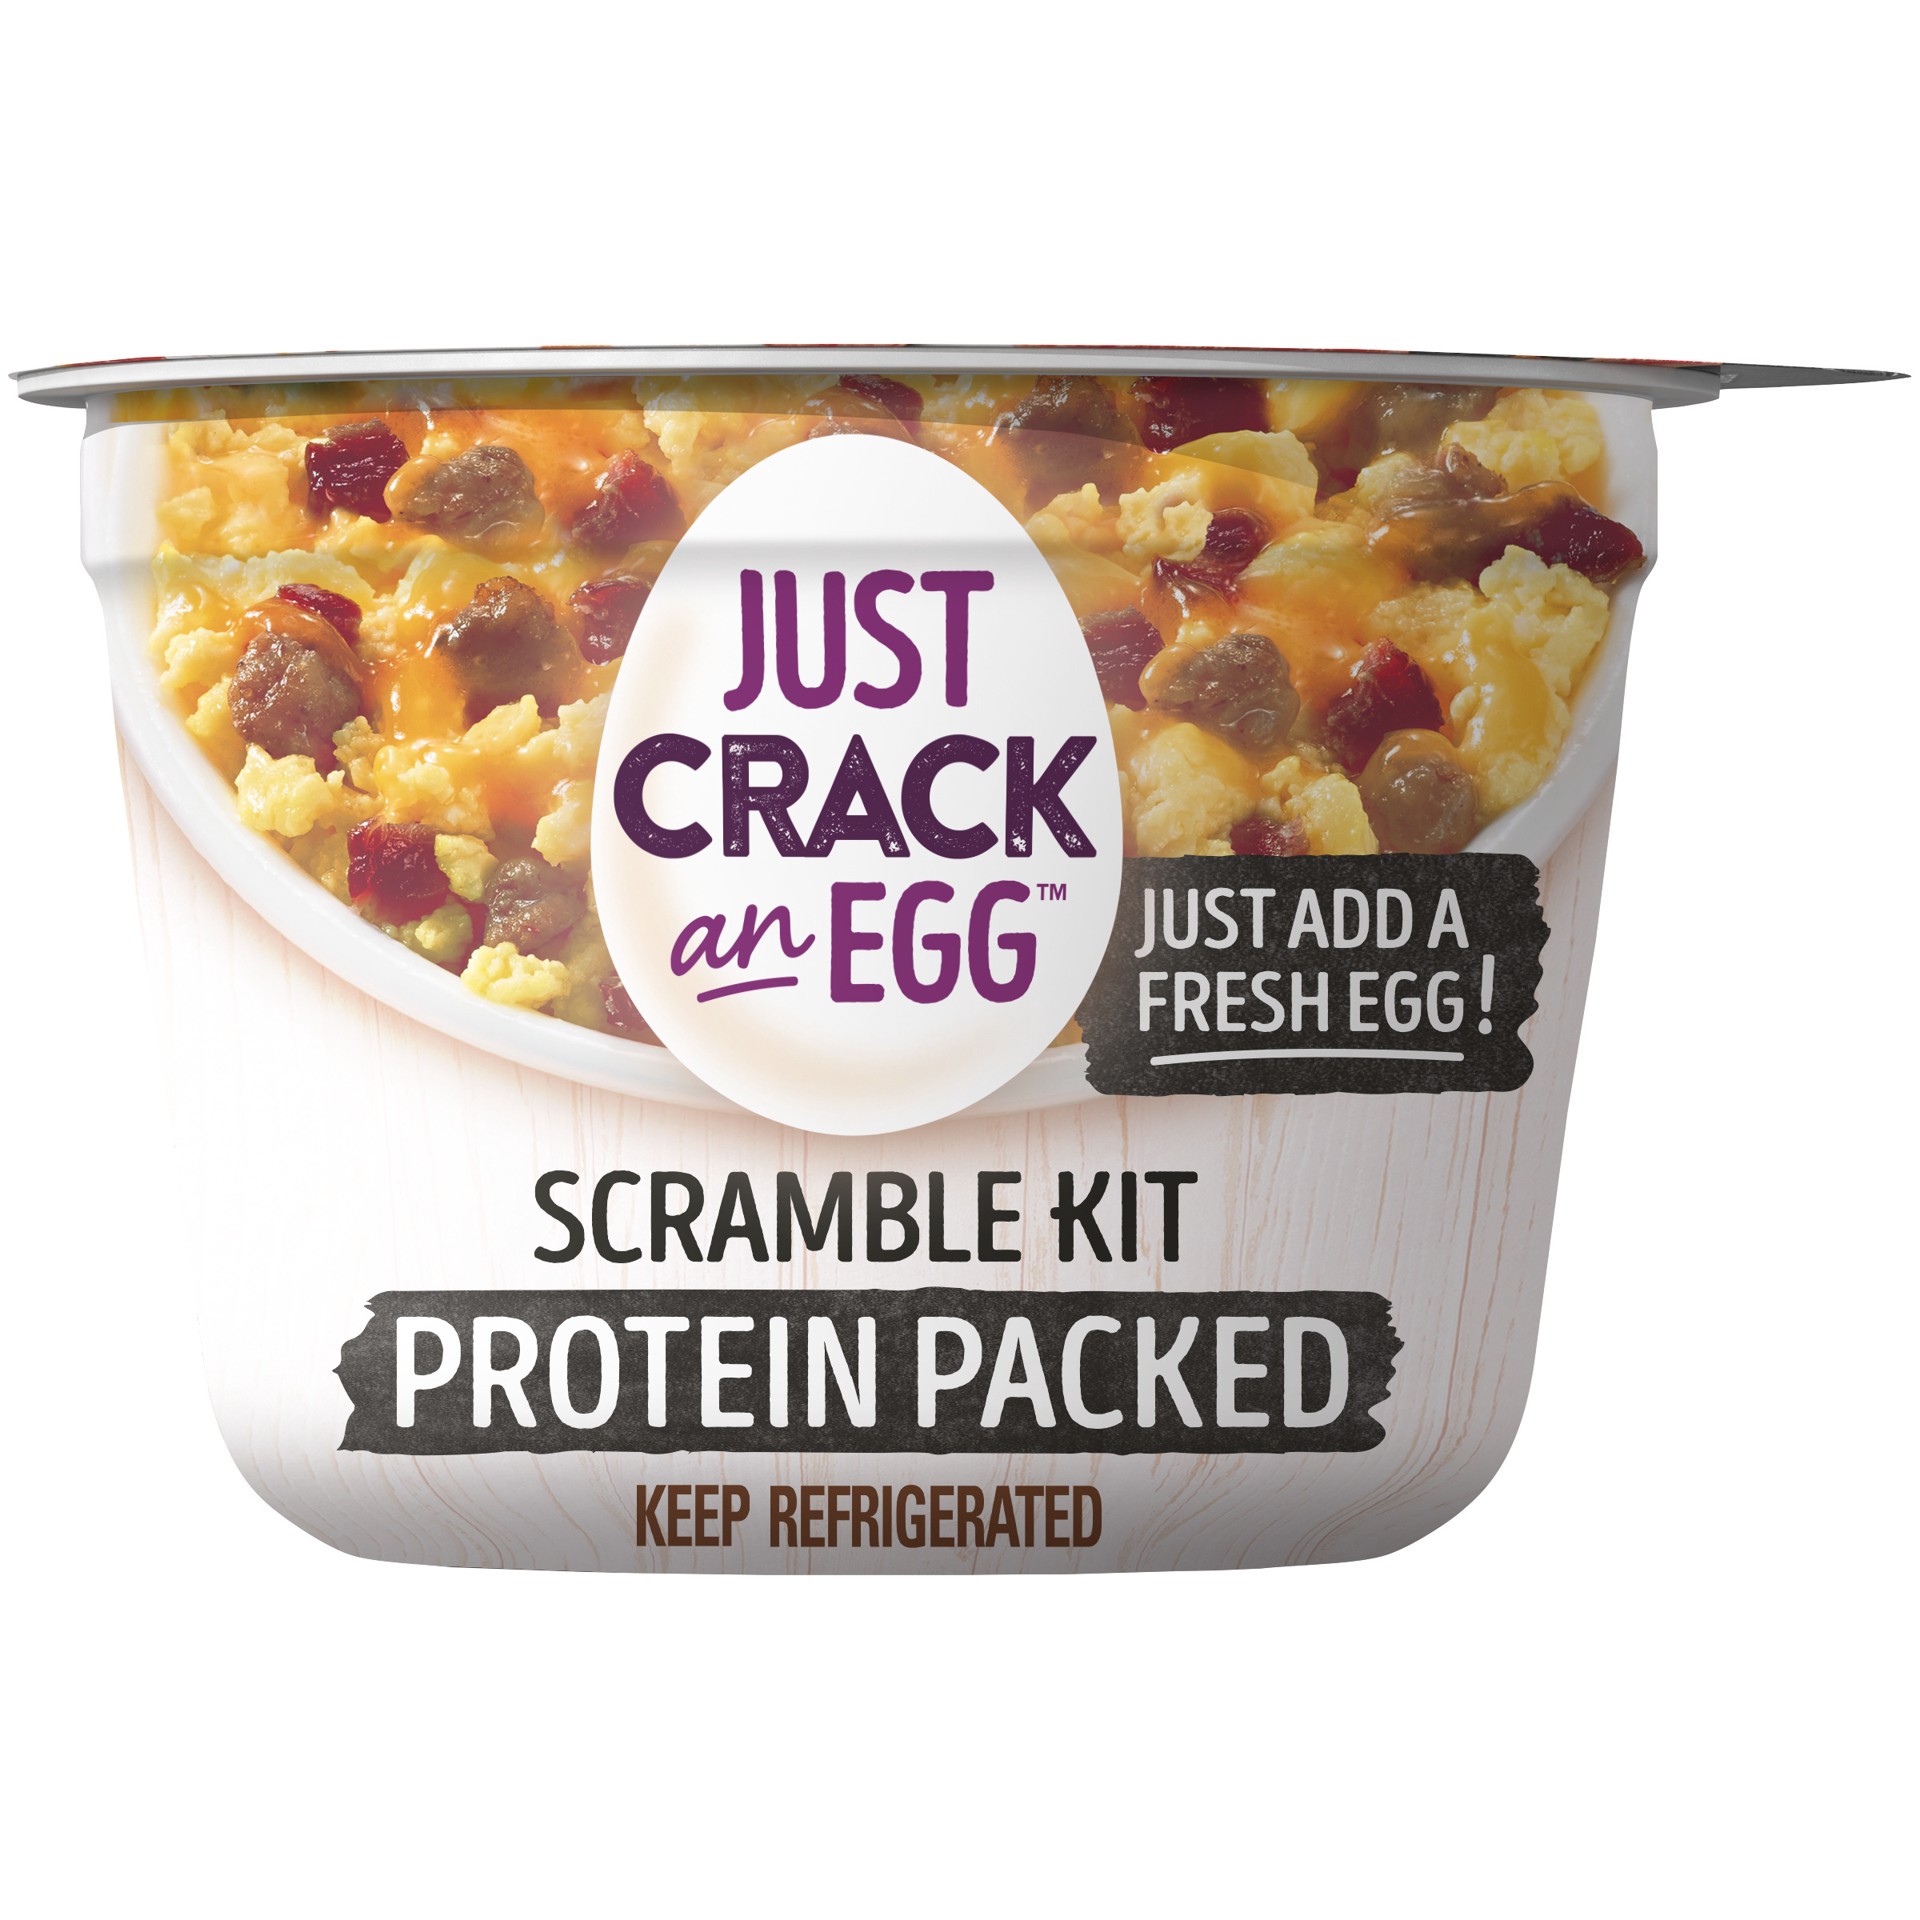 slide 1 of 9, Just Crack an Egg Scramble Kit Sharp Cheddar Cheese, Pork Sausage and Uncured Bacon, for a Low Carb Lifestyle, 2.25 oz. Cup,, 2.25 oz